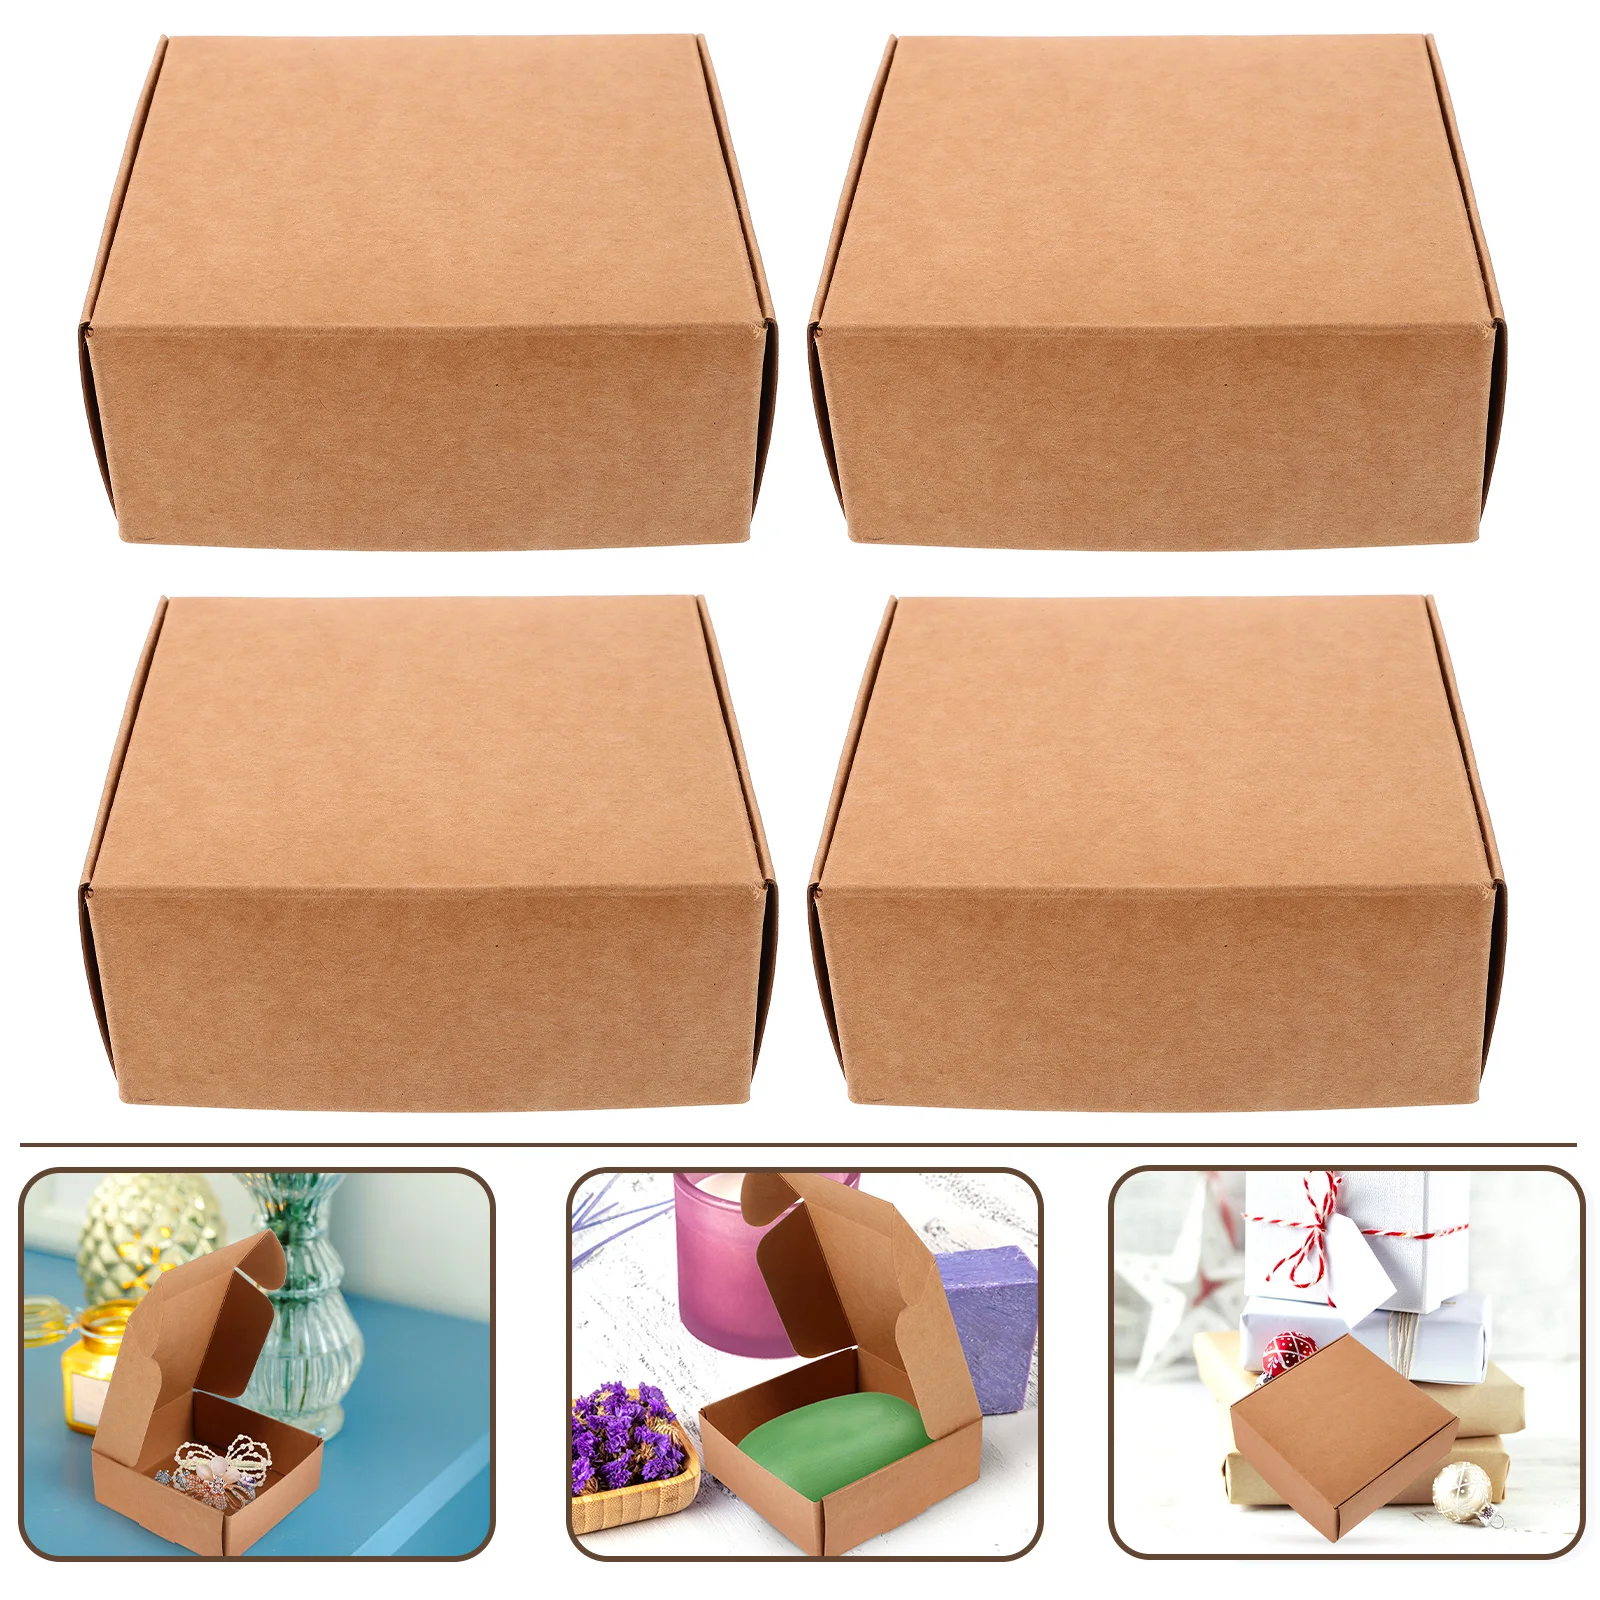 

20 Pcs Kraft Paper Box Party Gift Case Packing Handmade Soap Container Packaging for Making Wrappers Homemade Vellum